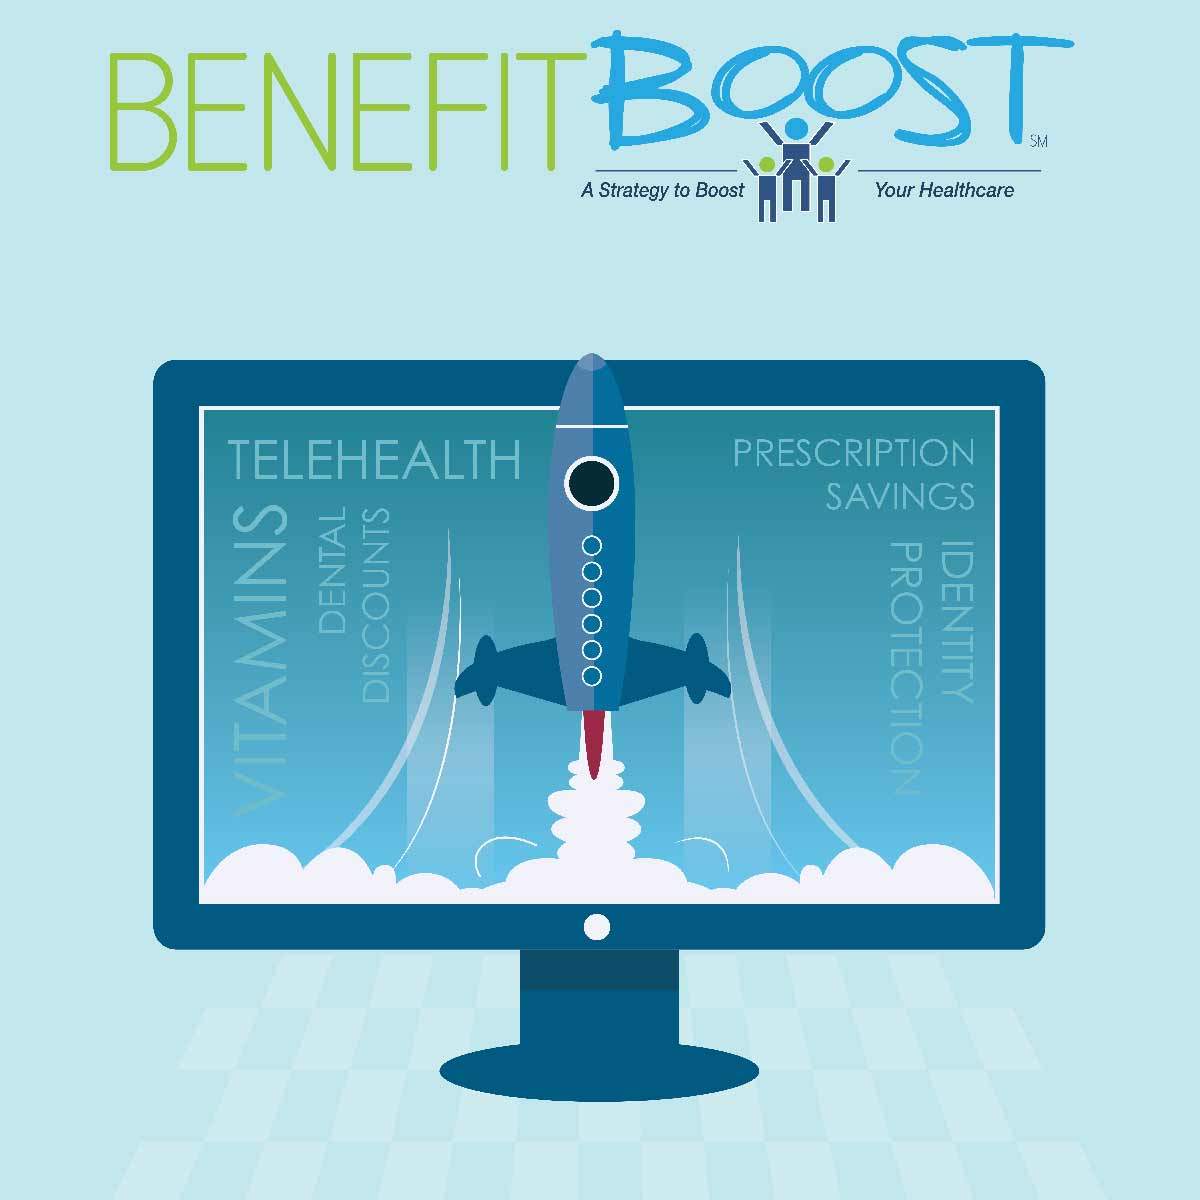 Full Package - Benefit Boost Subscription Product